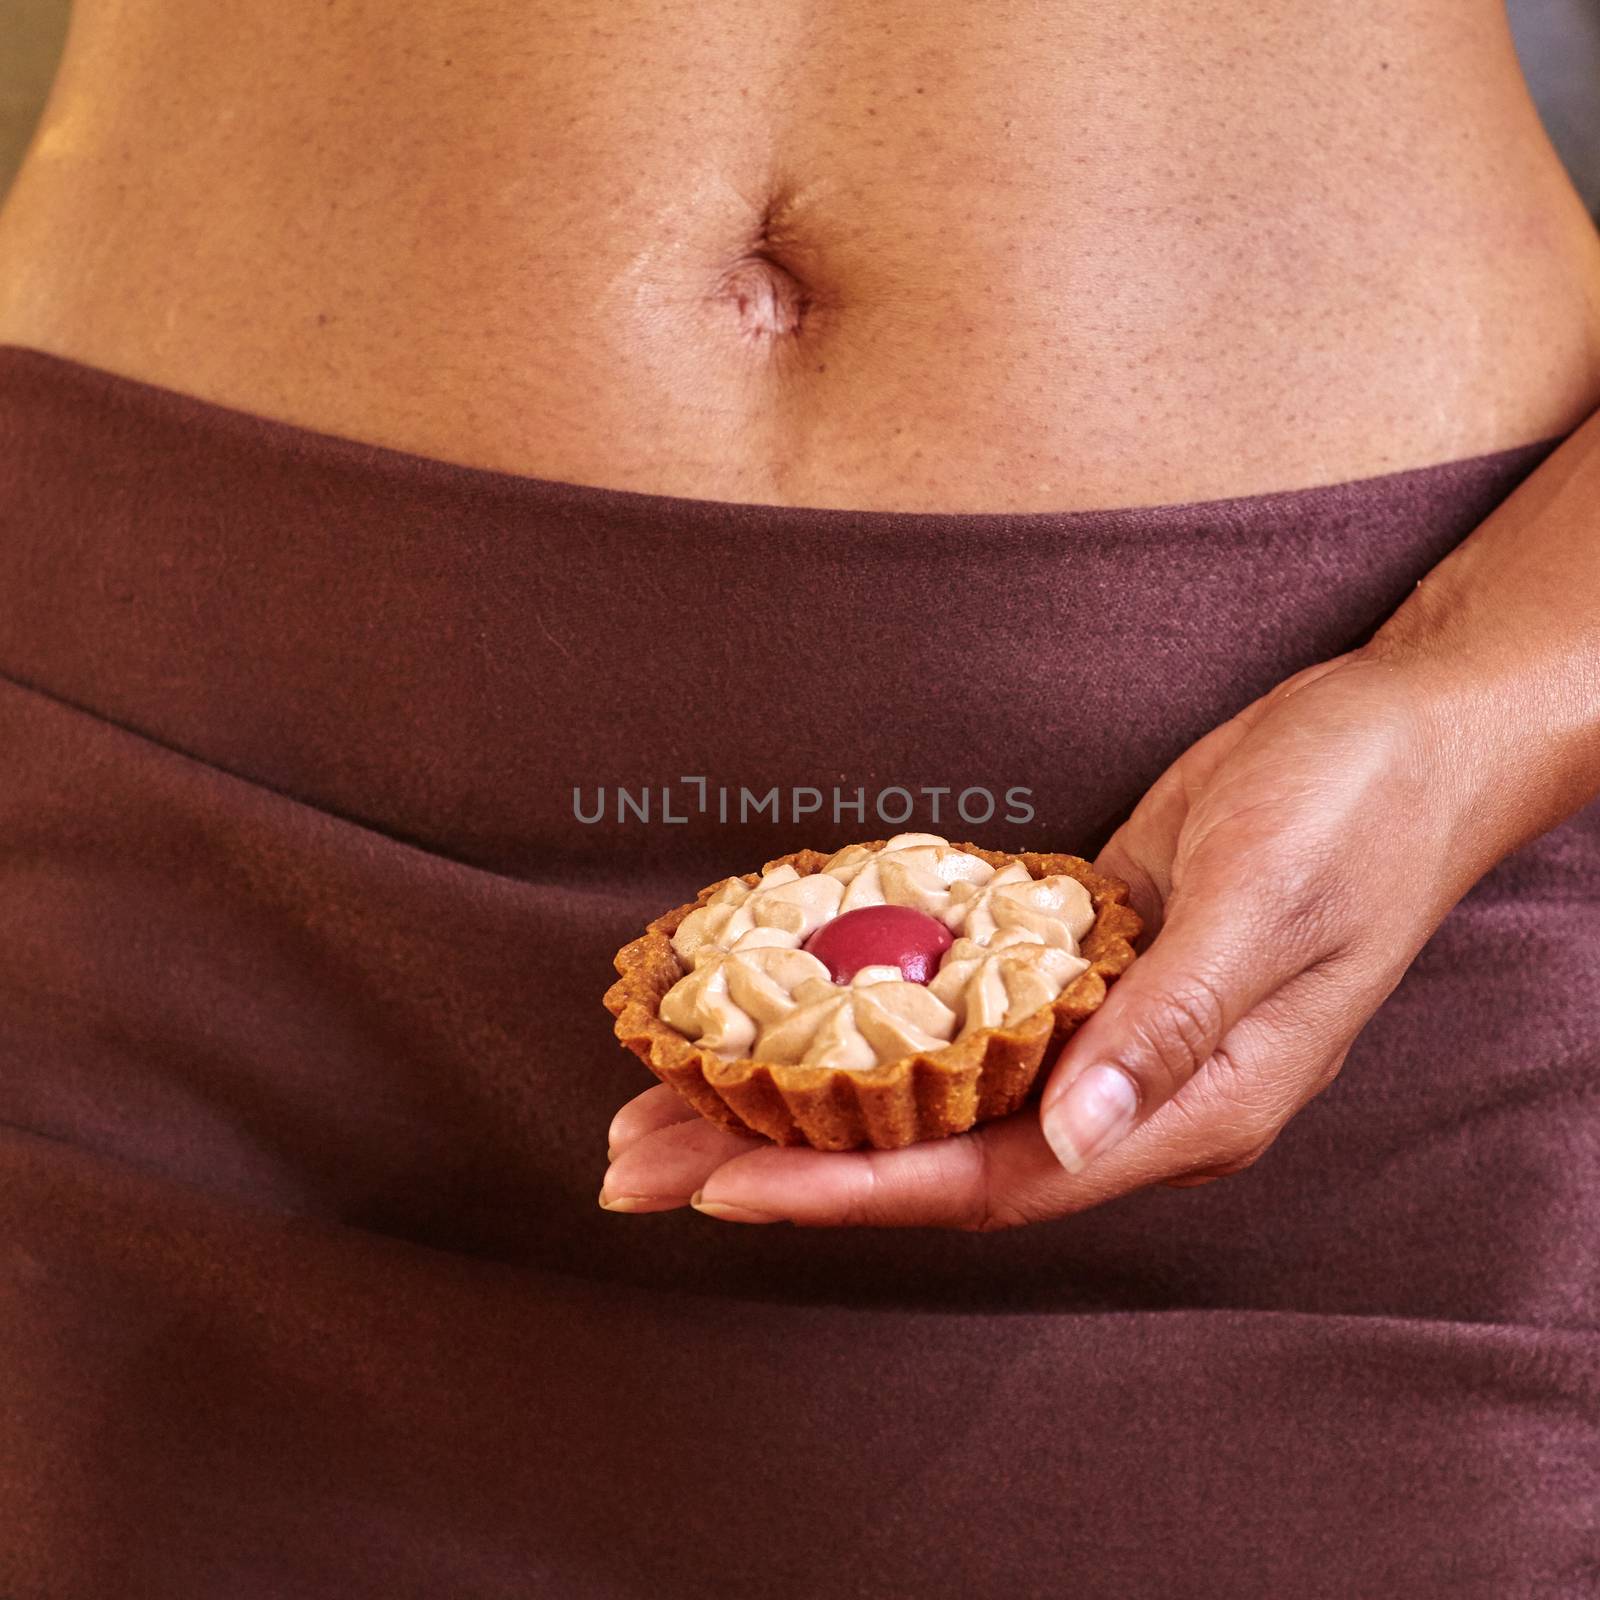 Dessert in the hand at the level of the abdomen. Temptation concept